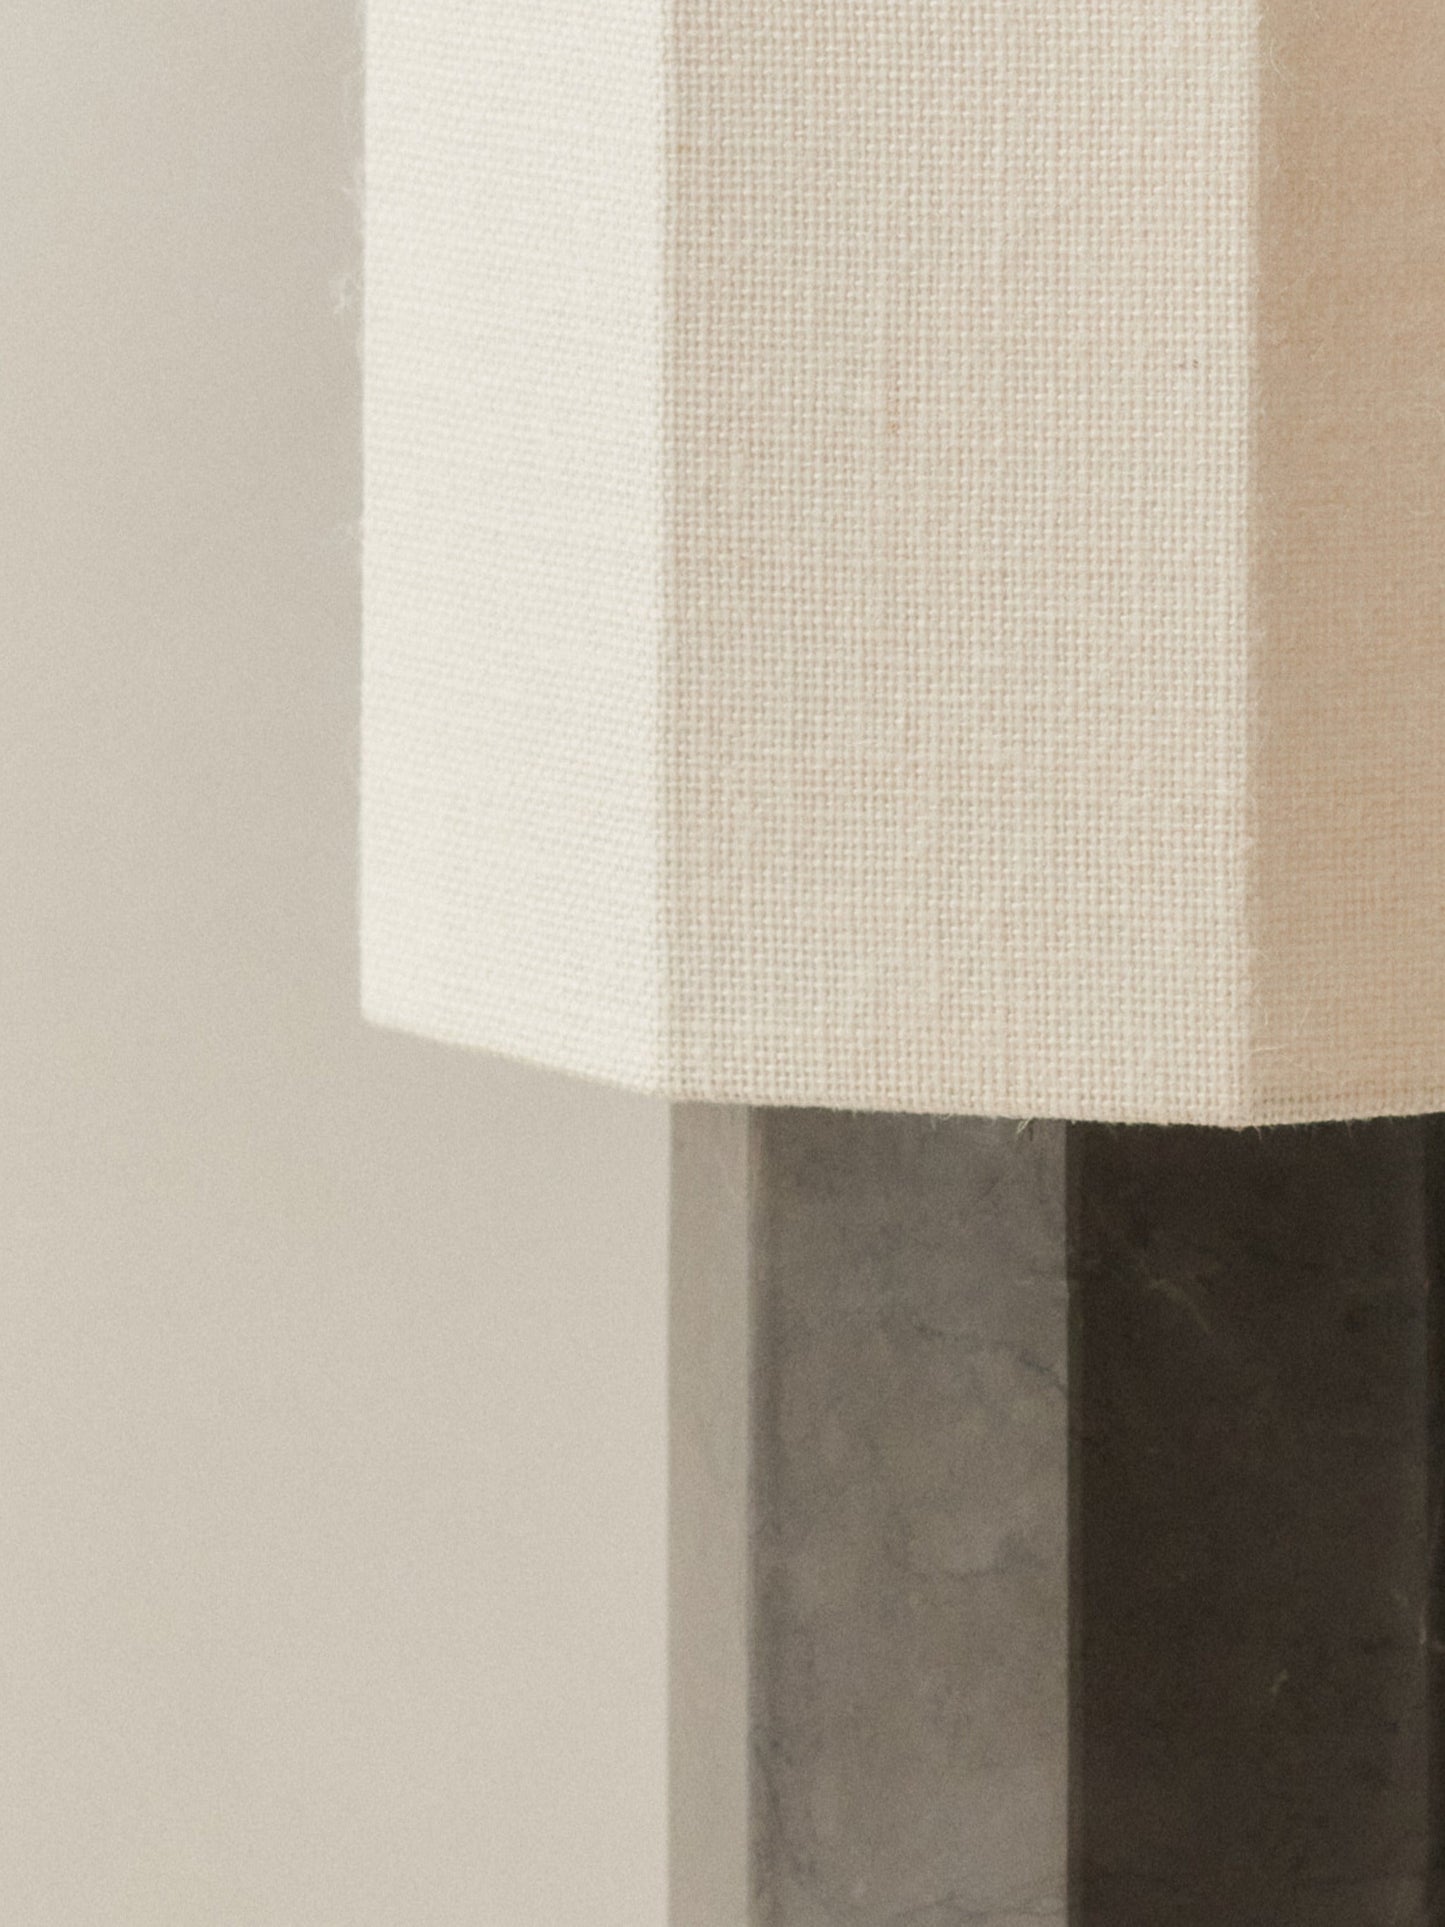 Eight over Eight Lamp - Grey Marble, Grande Table Lamps